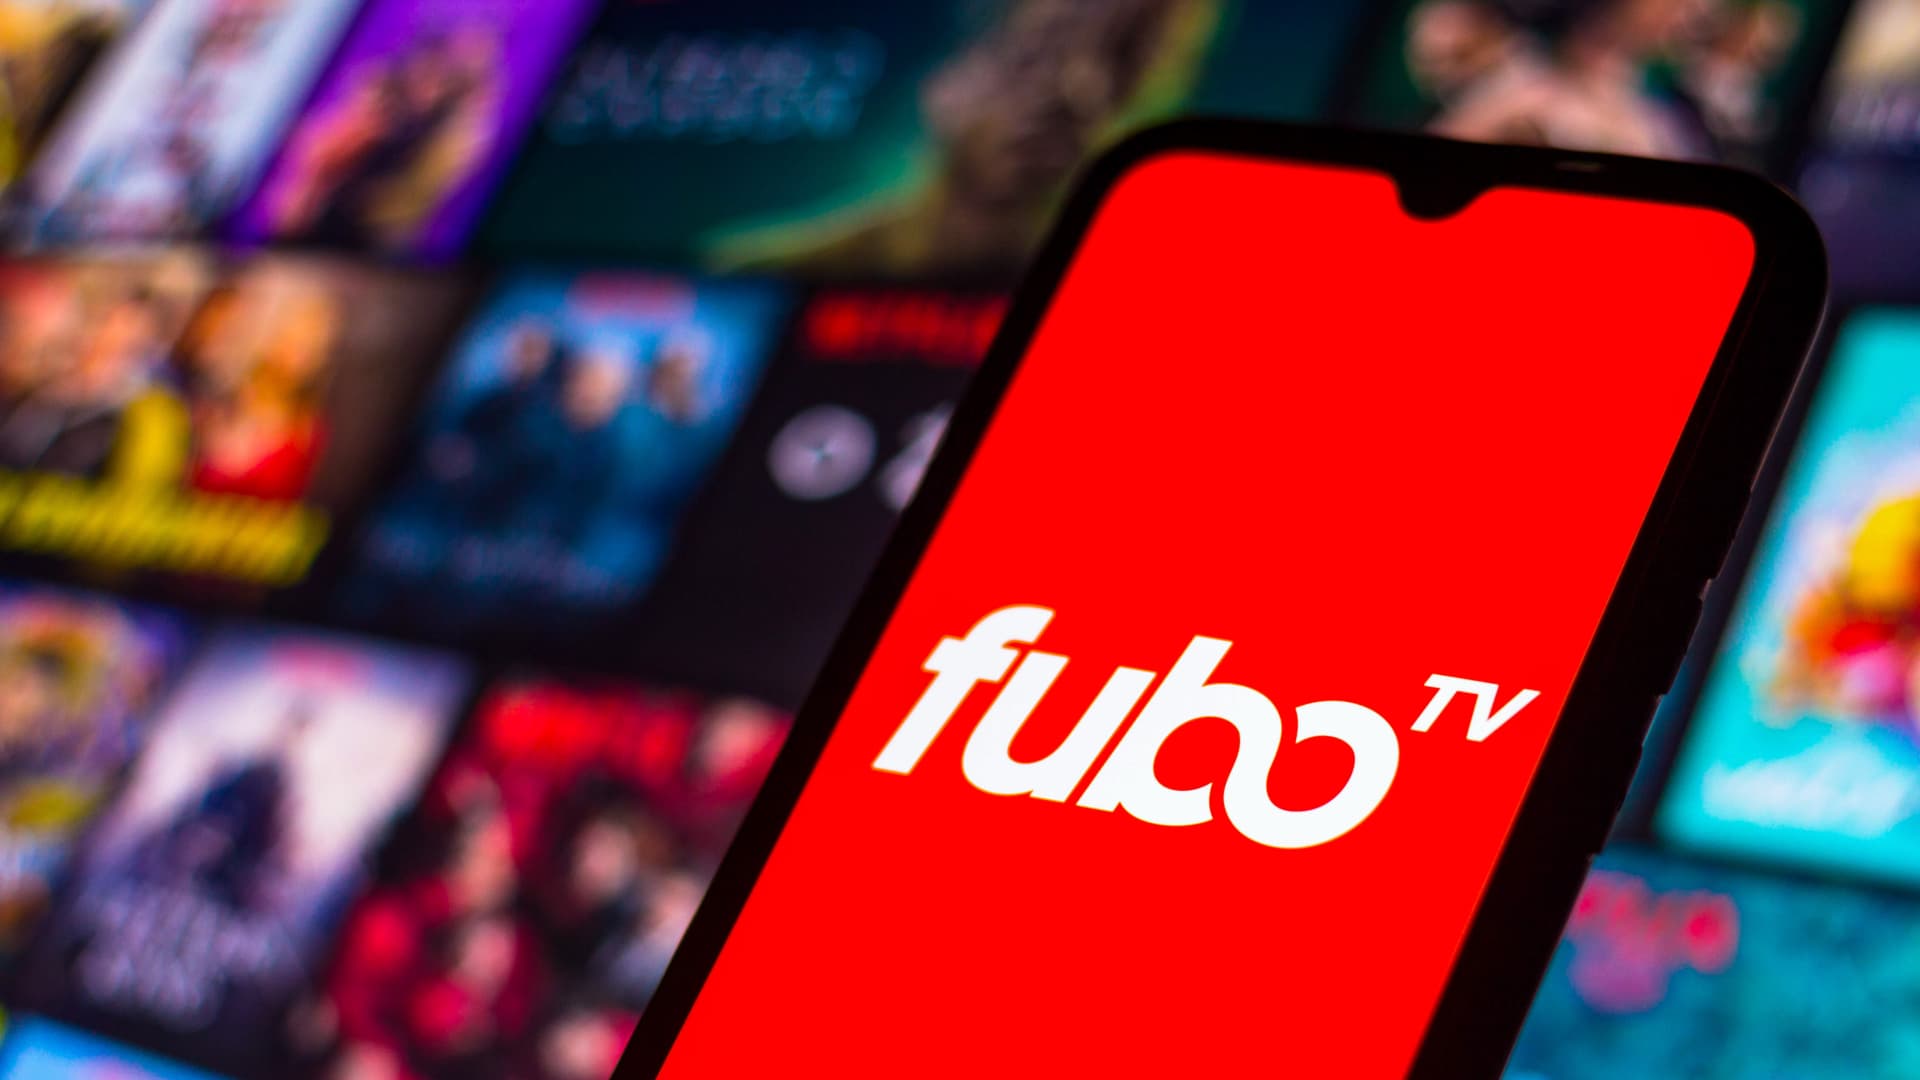 FuboTV hit with cyberattack during World Cup semifinal match